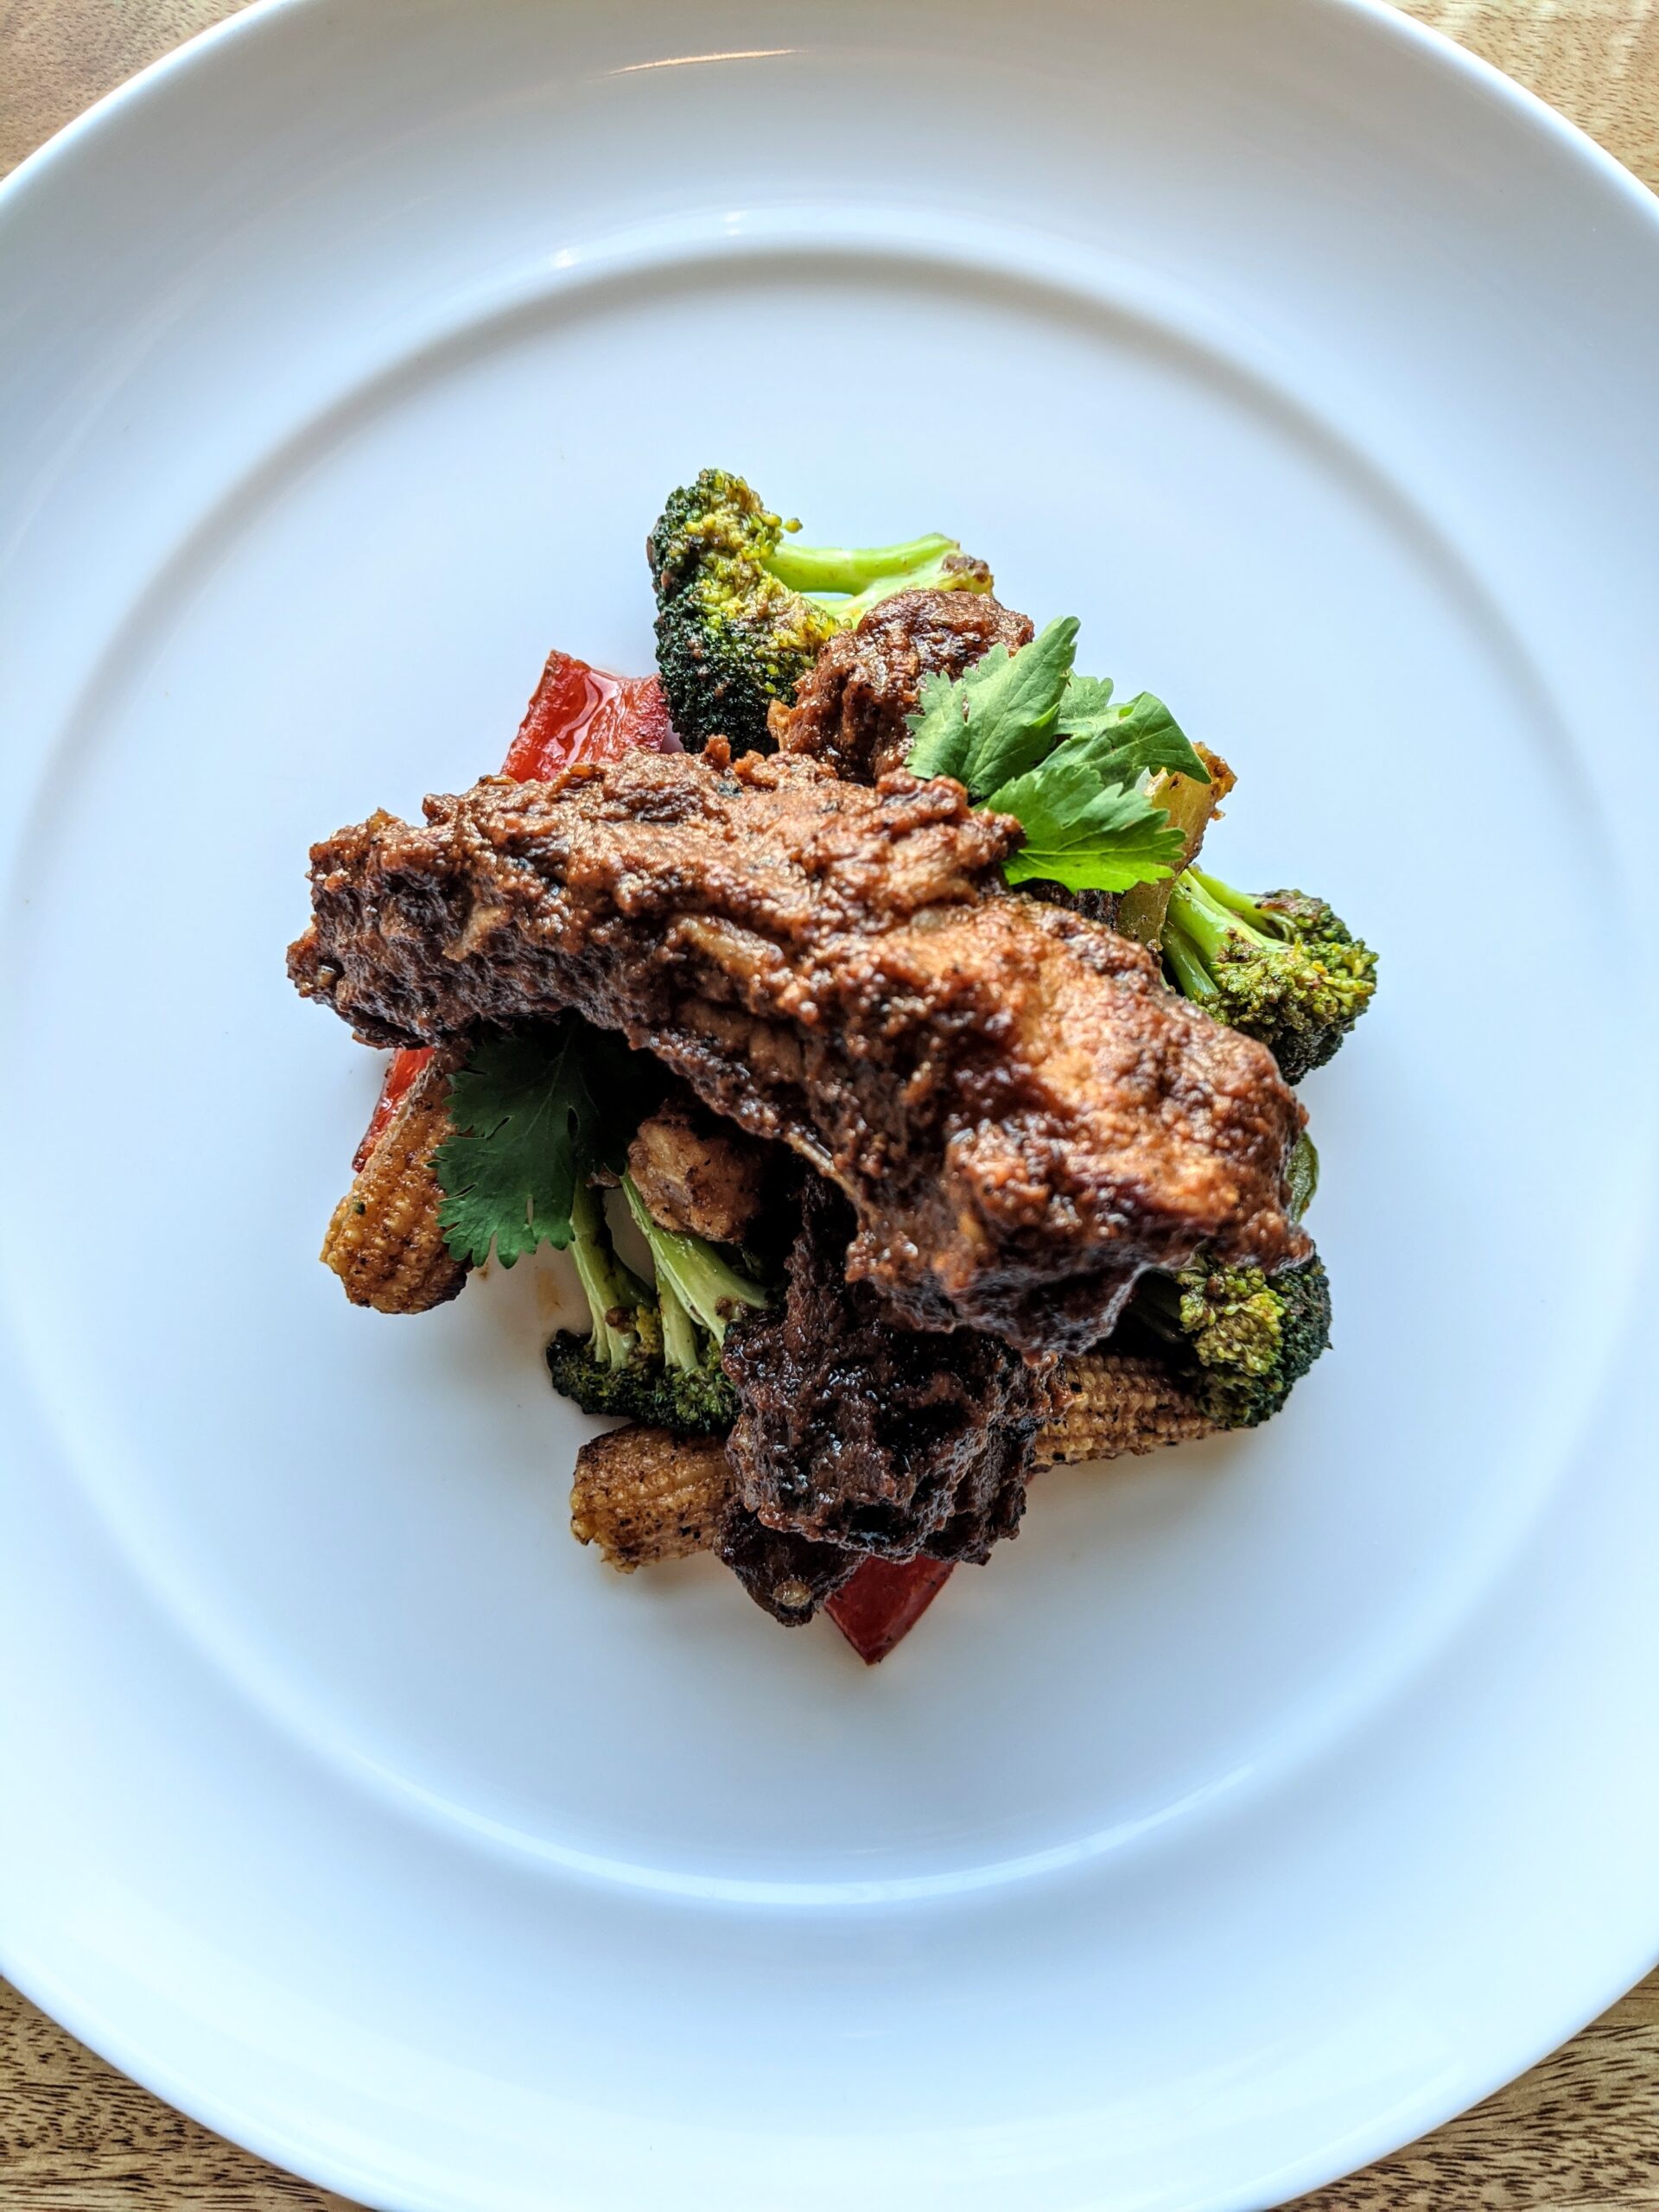 Two large Cambodian-style ribs with cognac and cinnamon, perched on top sautéed baby corn, red bell pepper, and broccoli.